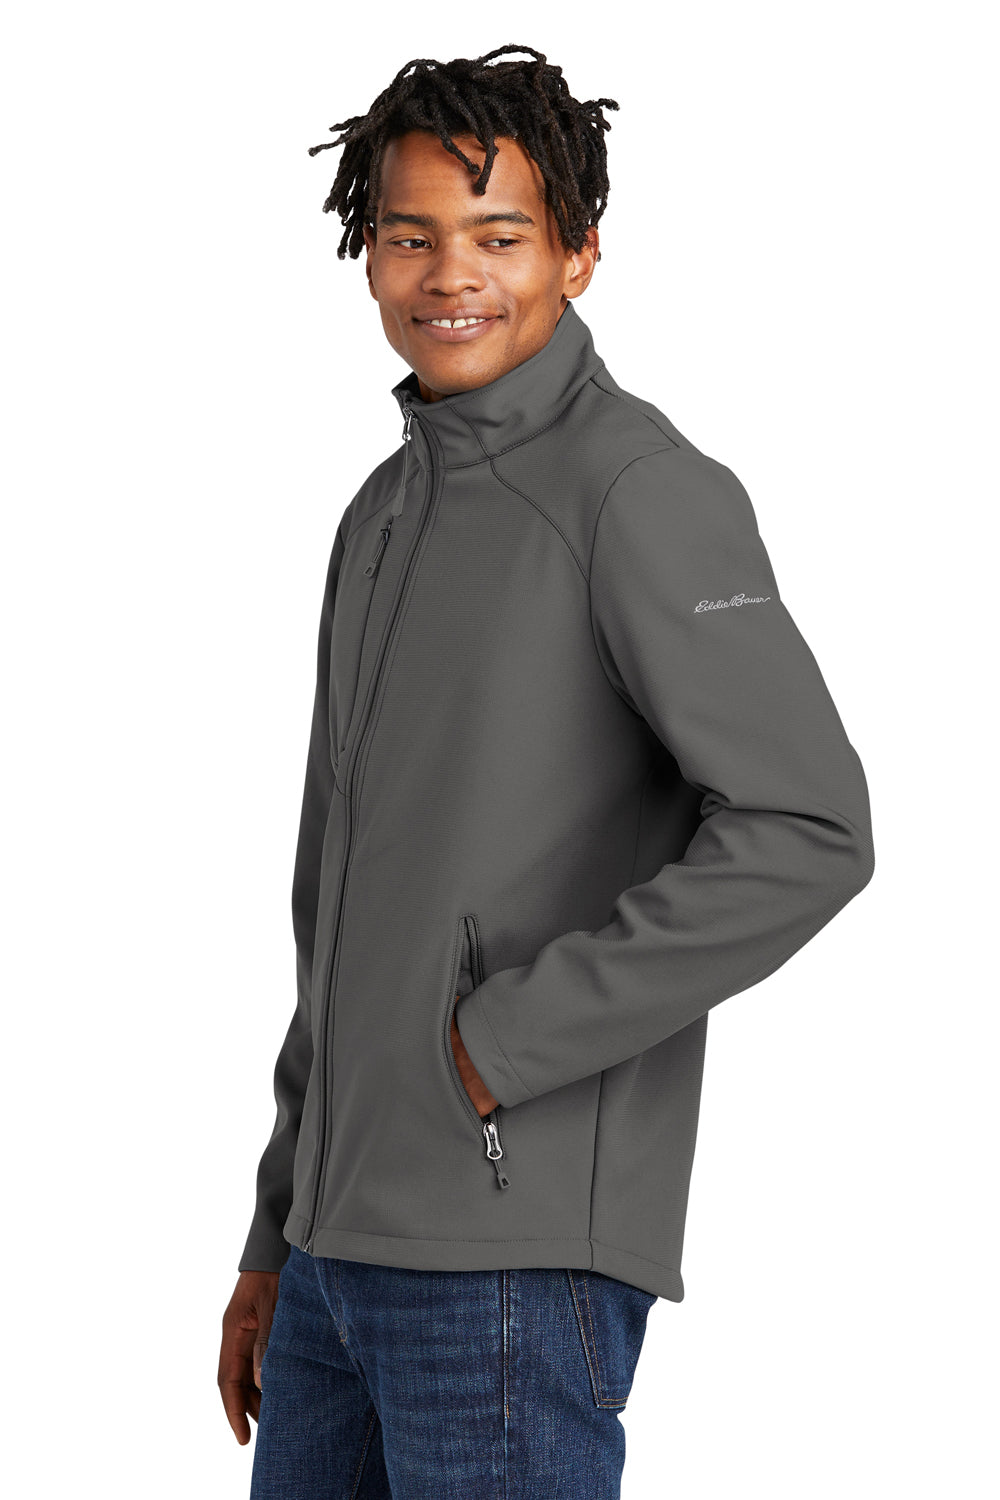 Eddie Bauer EB544 Mens Water Resistant Stretch Full Zip Soft Shell Jacket Iron Gate Grey Model Side